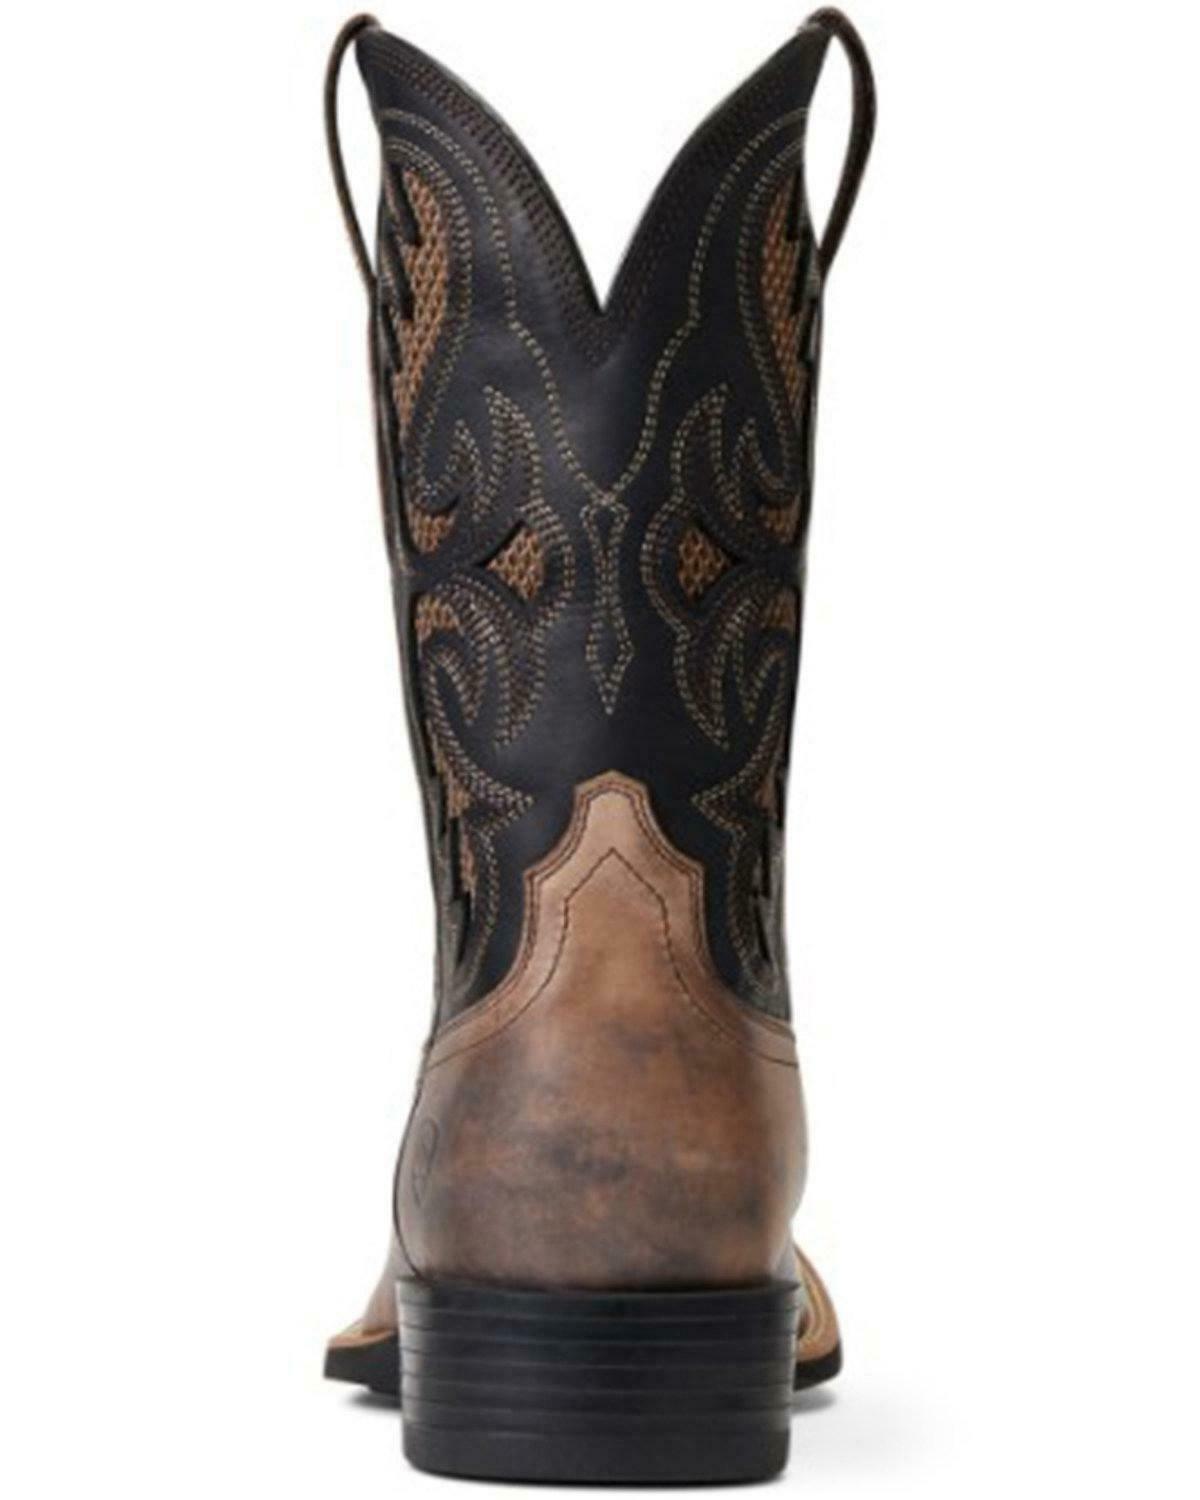 Ariat Men's Tally And Ink Sport Frisco Venttek Leather Western Boot 10040430